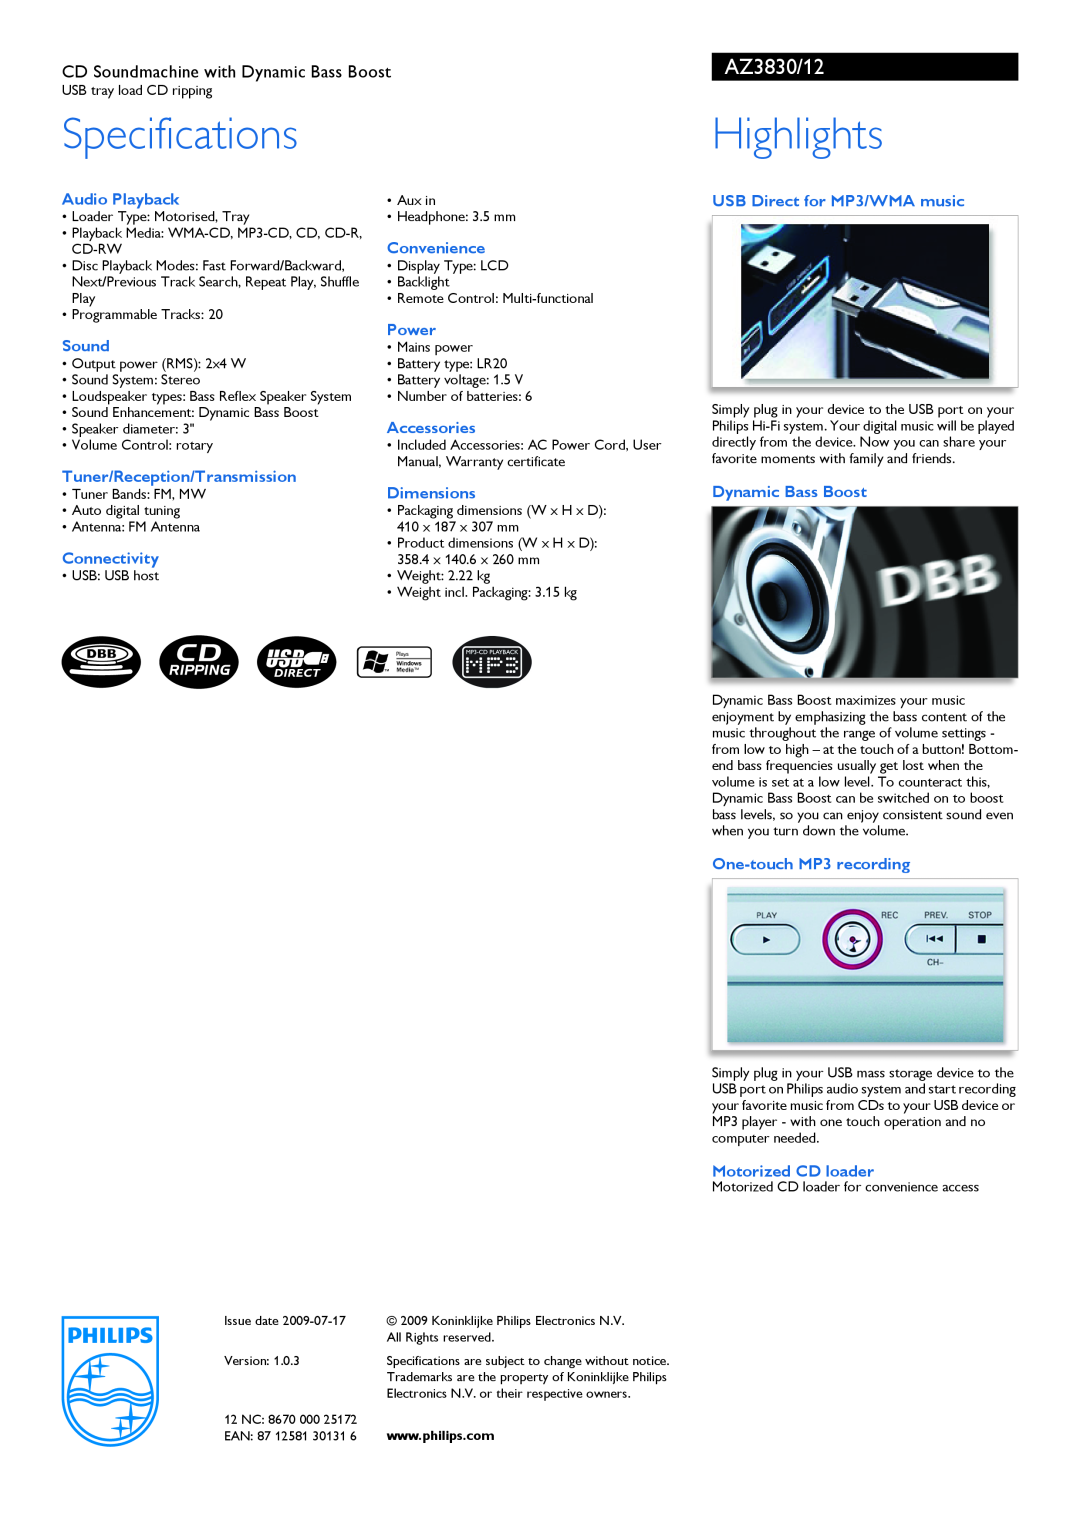 Philips AZ3830/12 manual CD Soundmachine with Dynamic Bass Boost, Specifications, Highlights 